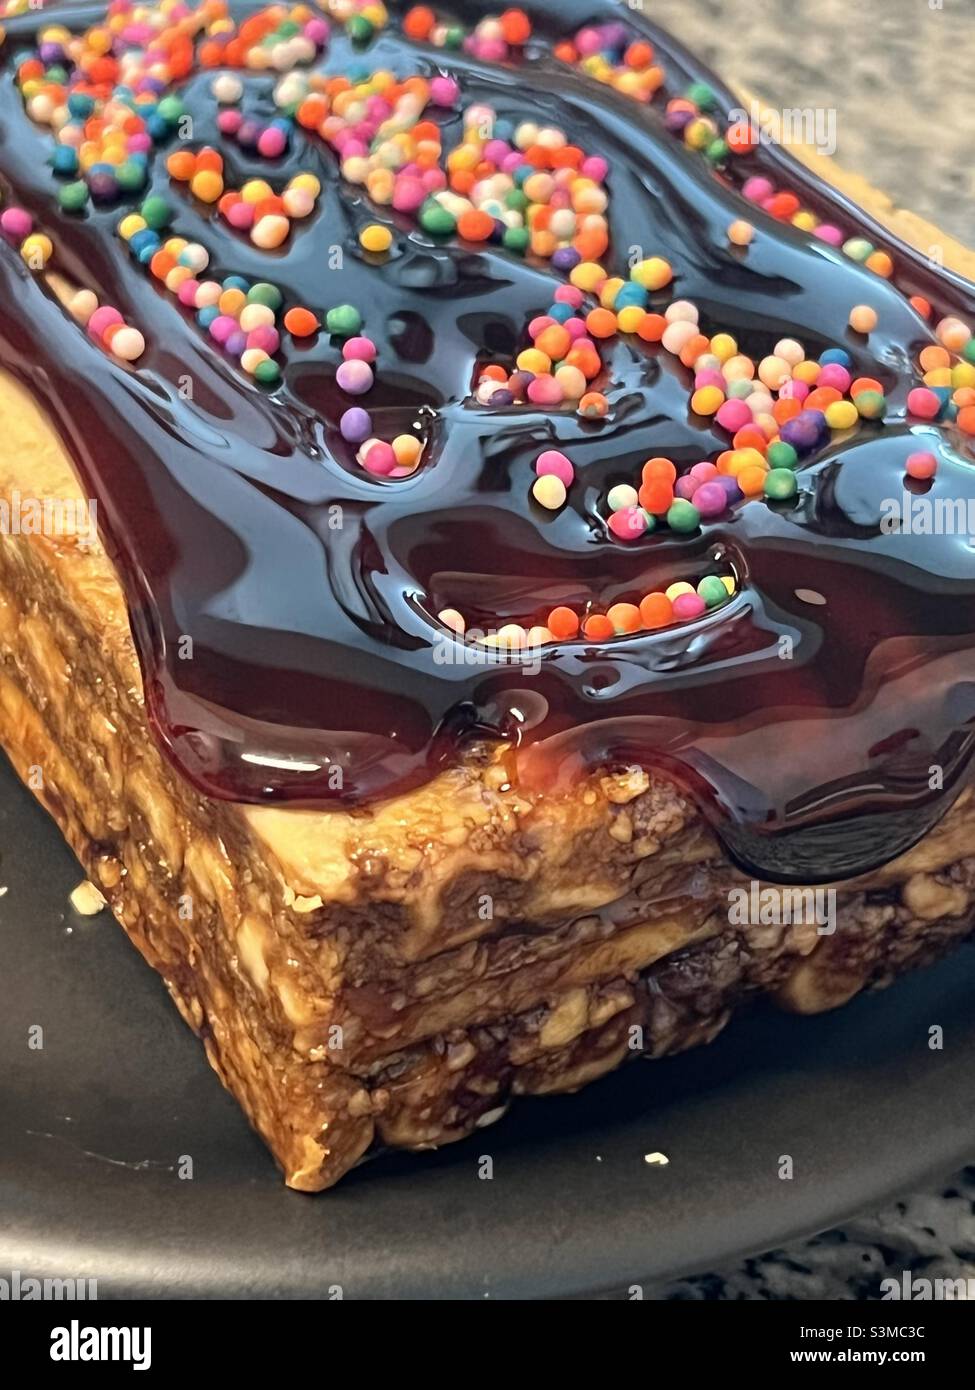 Turrón de Doña Pepa, sweet, cookie layered anise flavored treat soaked in brown sugar cane syrup (called chancaca) and topped with candy sprinkles. Stock Photo